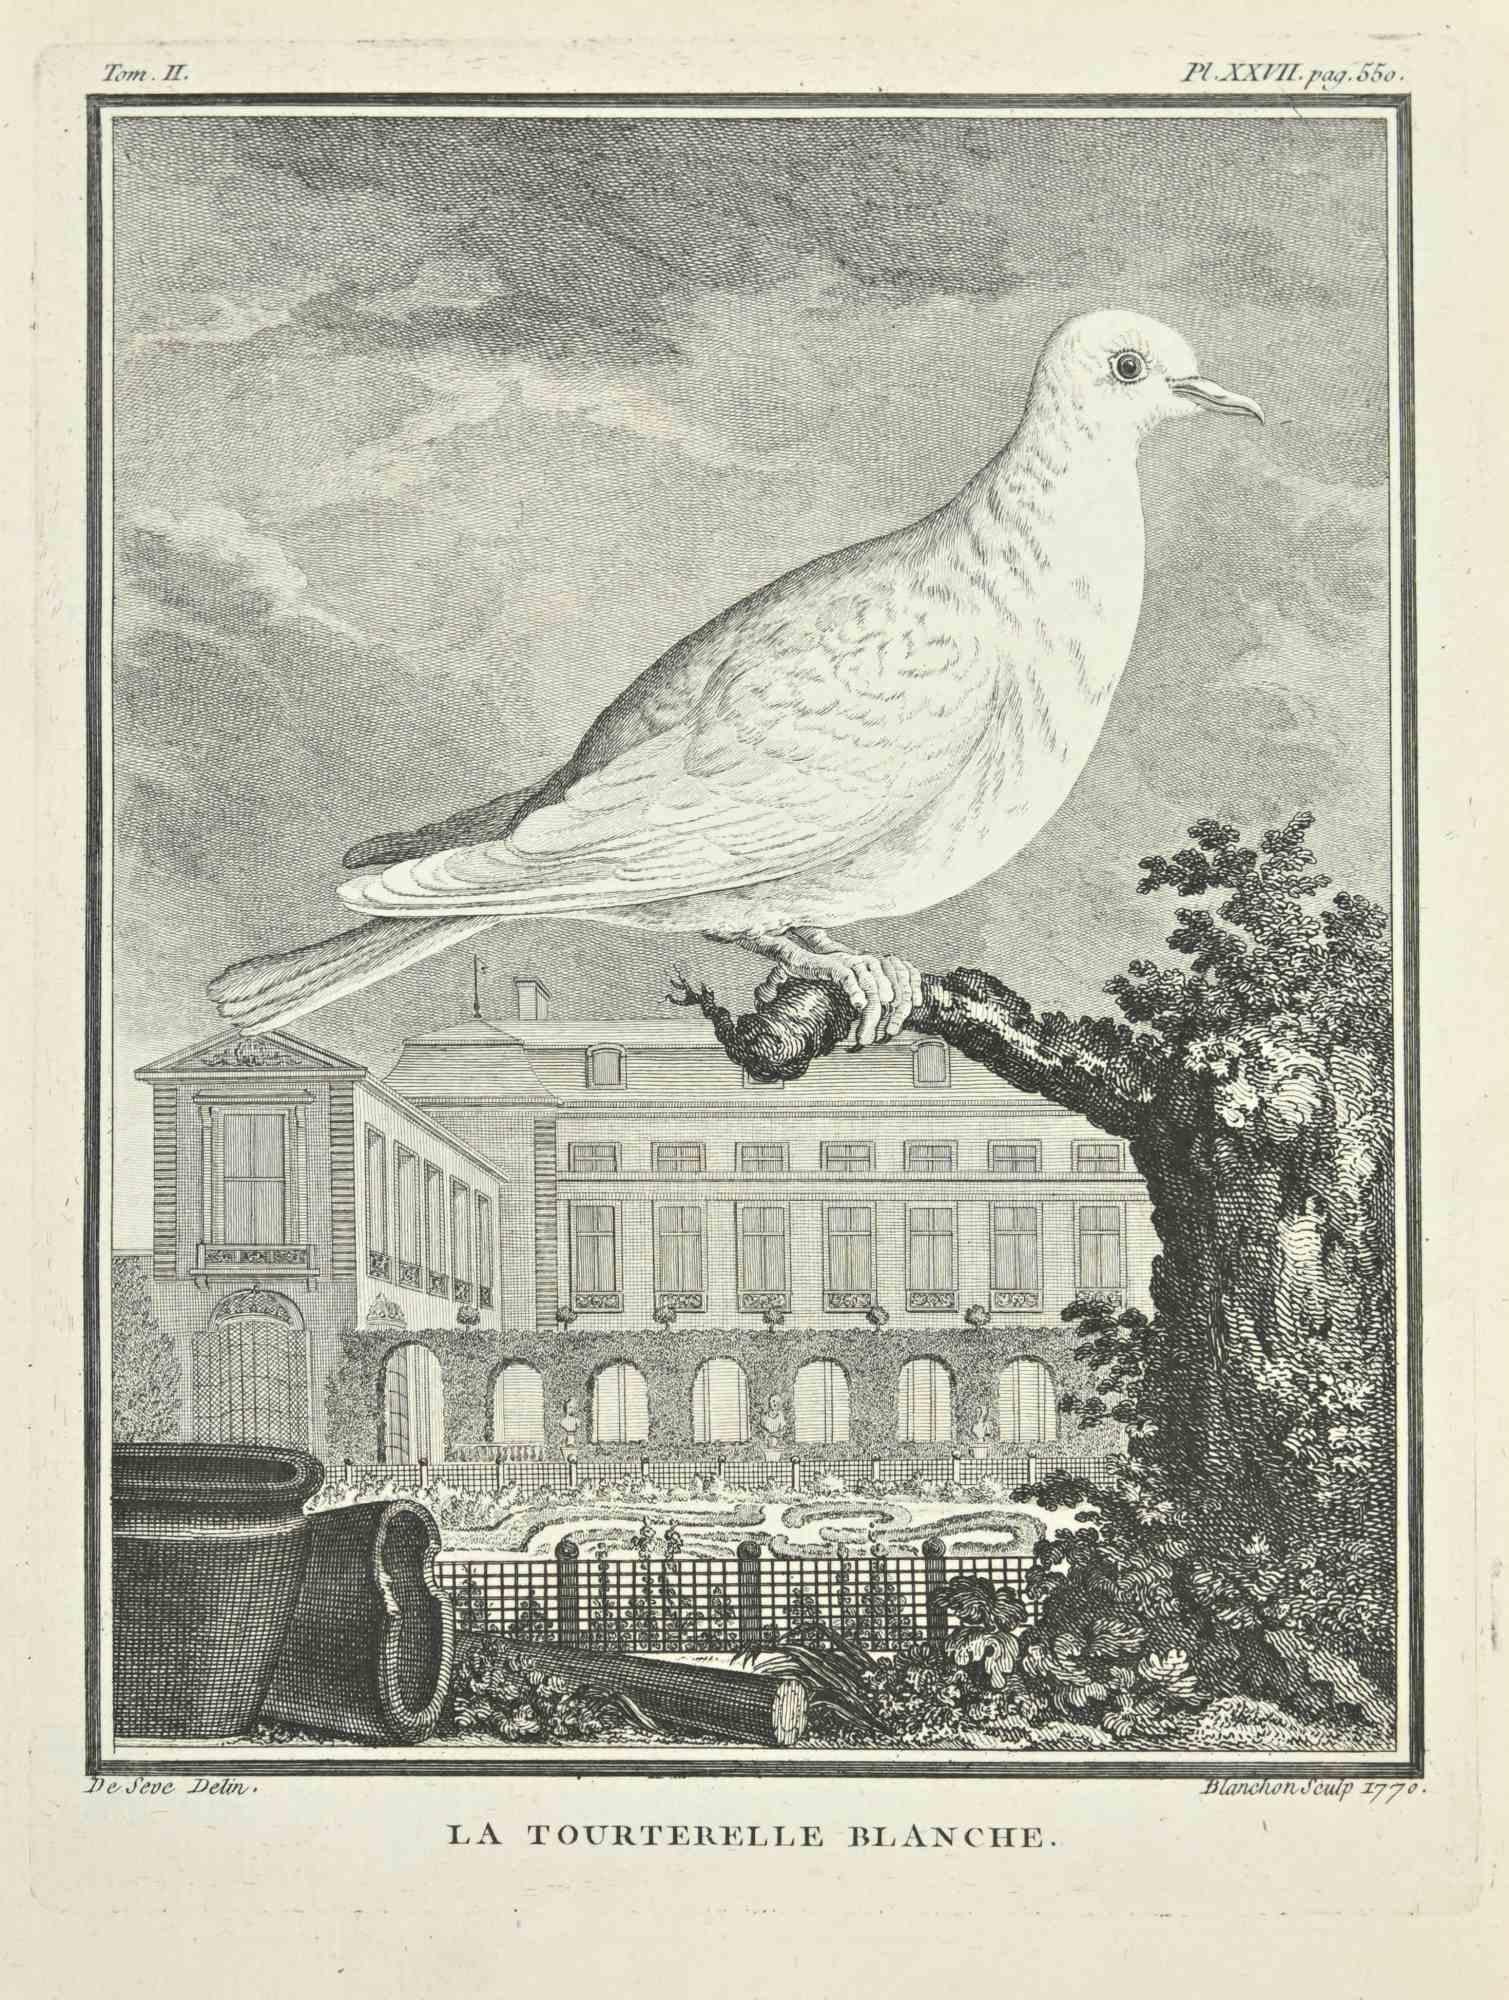 La Tourtereller Blanche is an etching realized by Jacques Blanchon in 1771.

It belongs to the suite "Histoire Naturelle de Buffon".

The Artist's signature is engraved lower right.

Good conditions.